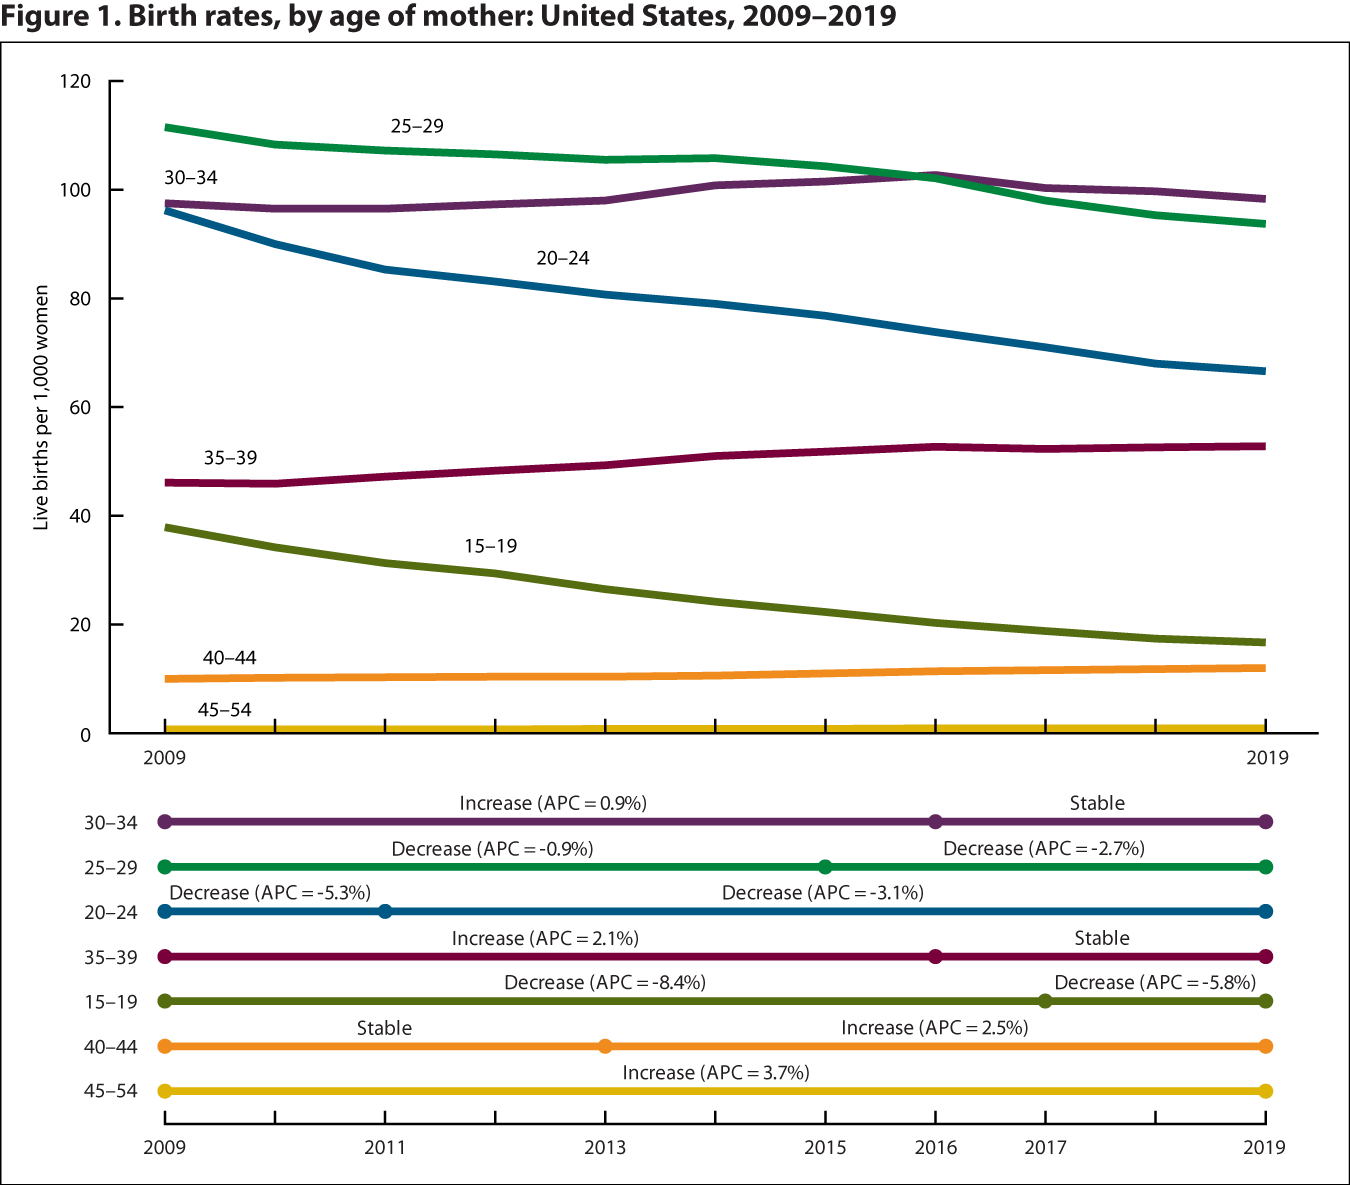 Figure 1 is a line graph showing birth rates (live births per 1,000 women) by age of mother for 2009 through 2019.